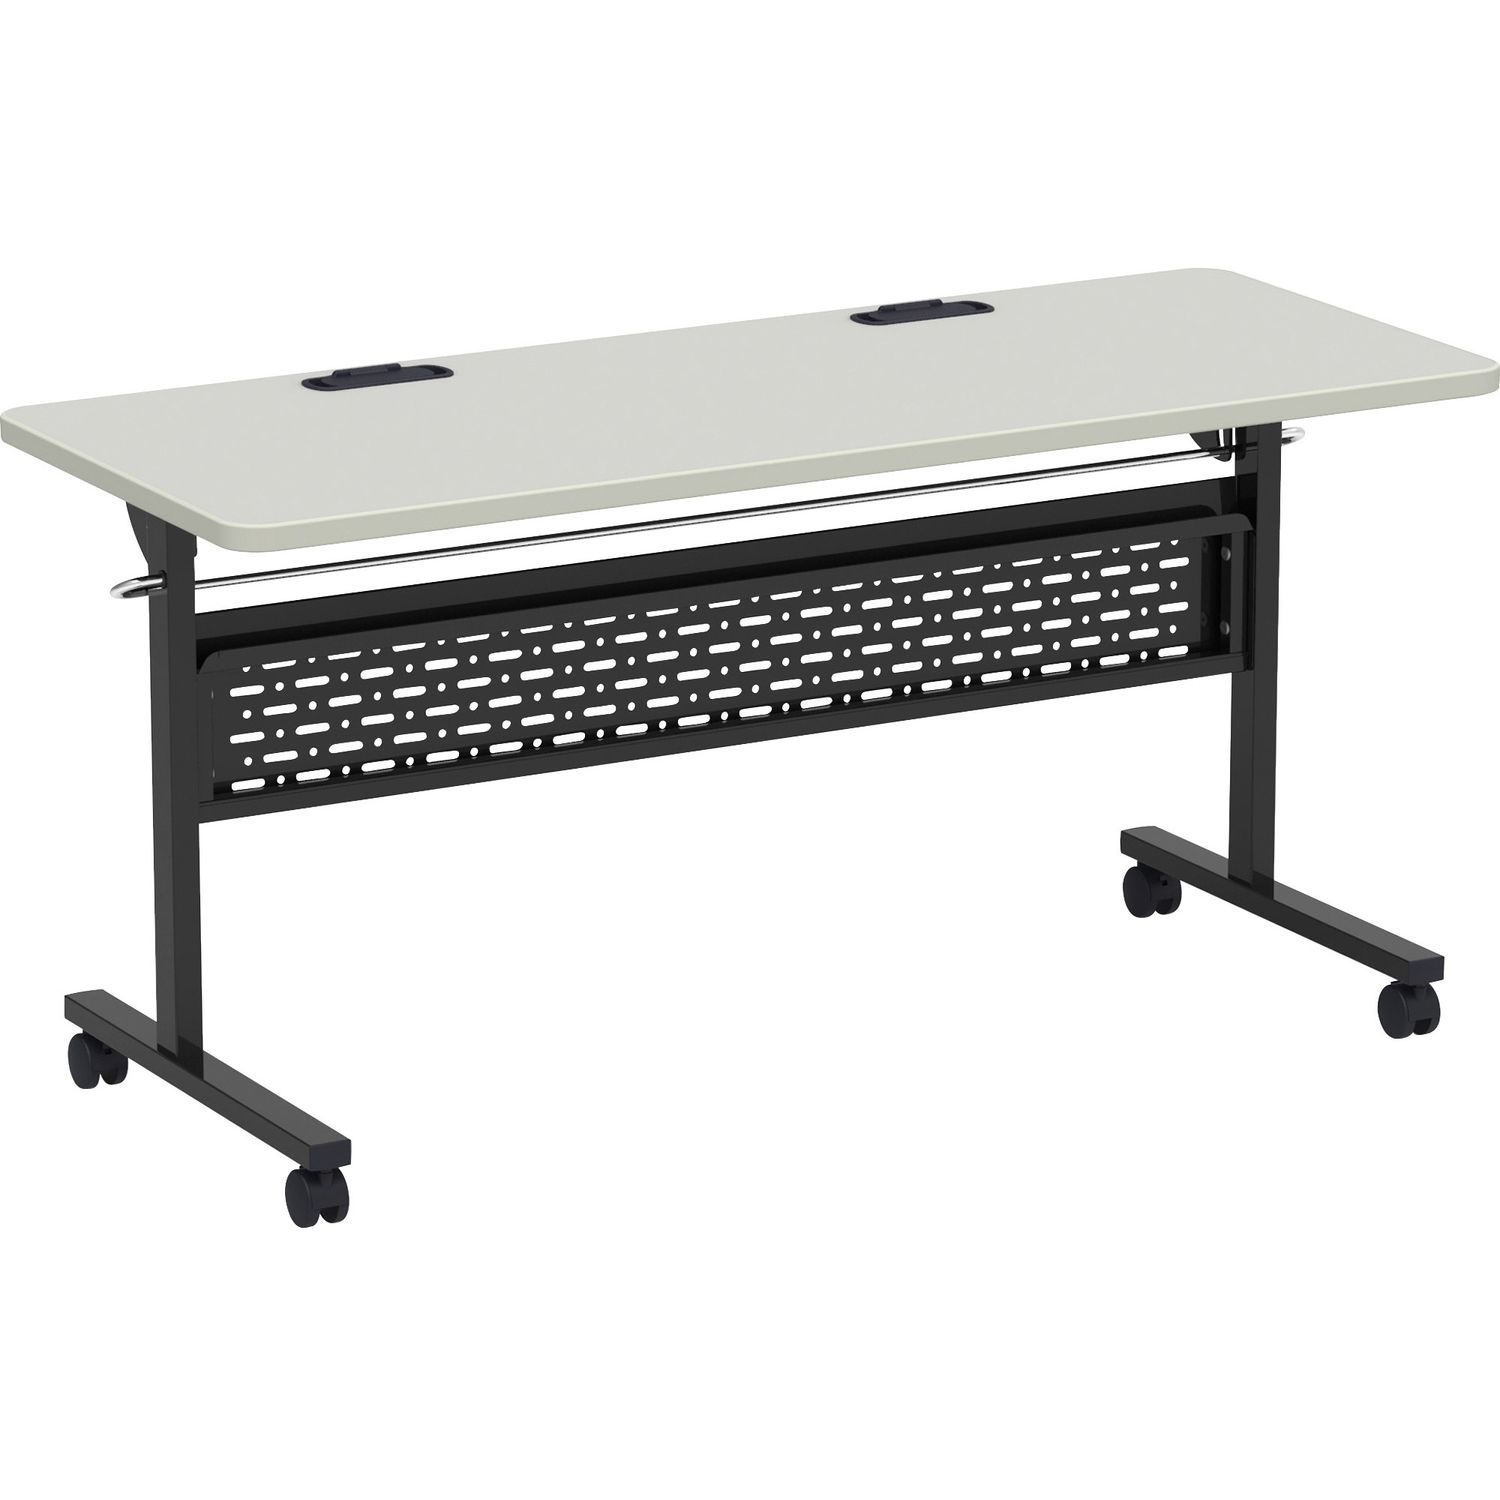 Flip Top Training Table Gray Triangle, High Pressure Laminate (HPL) Top, 60" Table Top Width x 24" Table Top Depth, 30" Height, Assembly Required